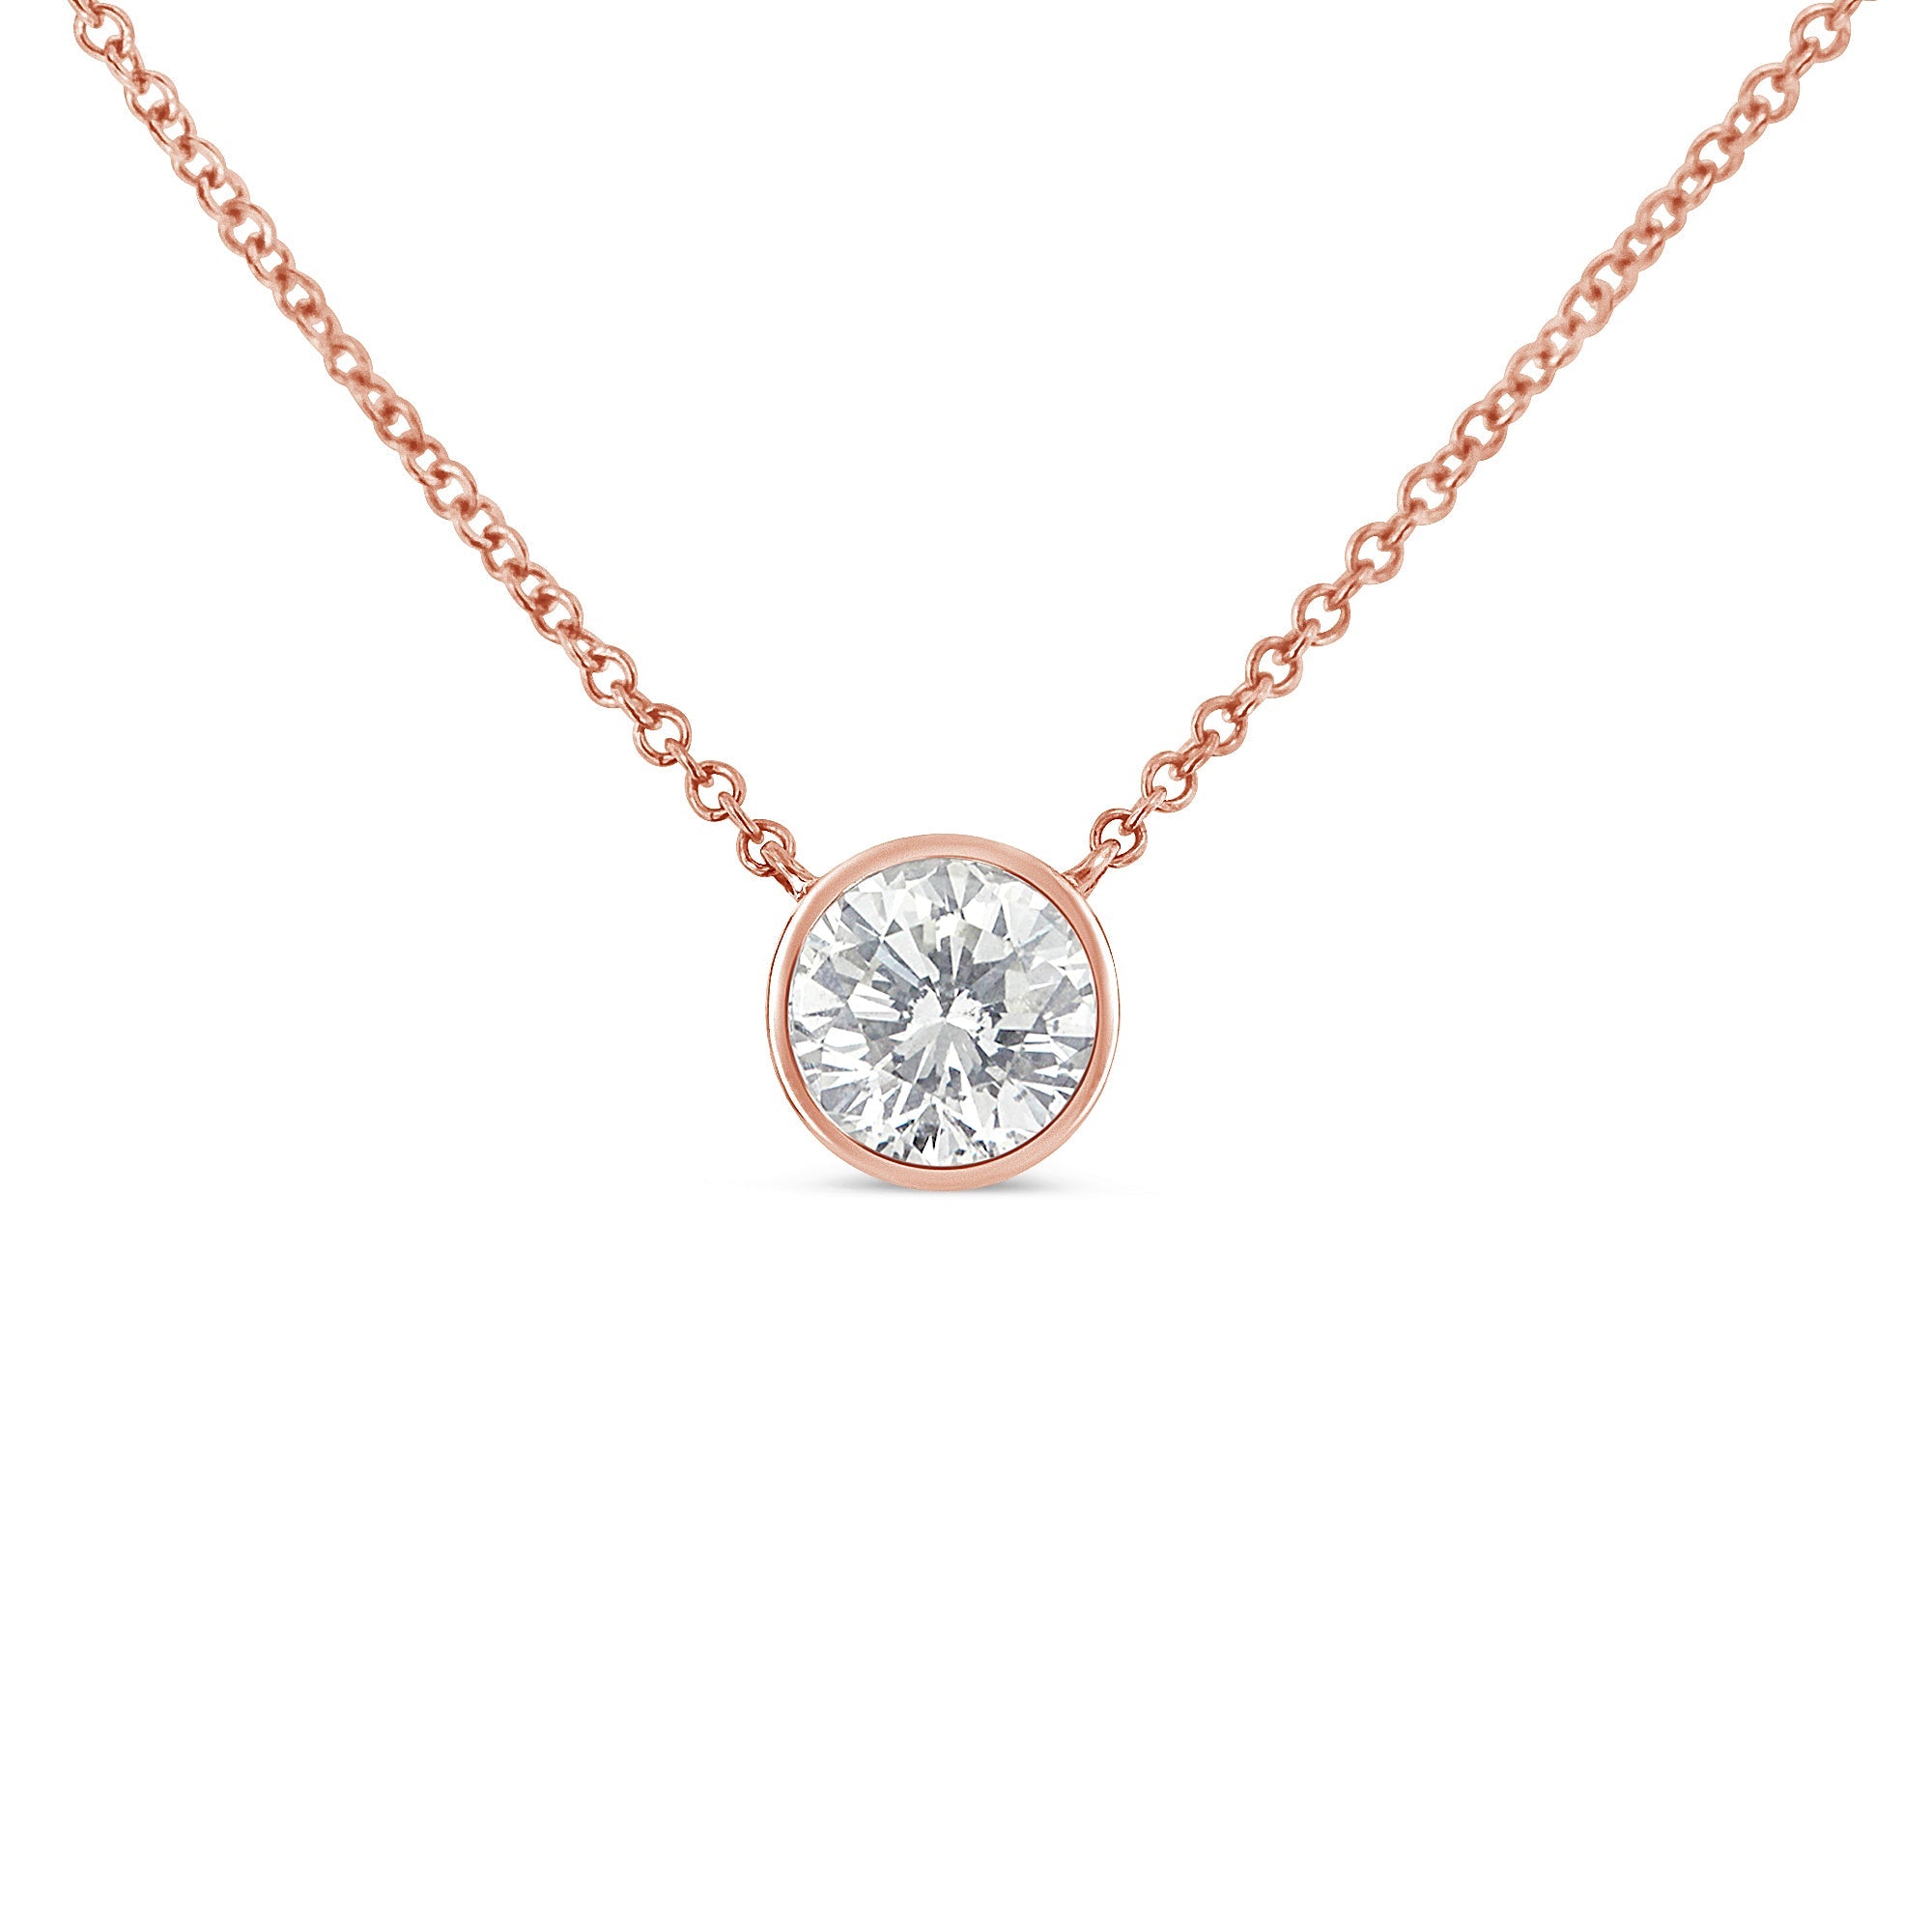 2 Micron 14K Rose Gold Plated Sterling Silver Bezel-Set Diamond Solitaire Pendant Necklace (1/3 cttw, H-I Color, I1-I2 Clarity) - LinkagejewelrydesignLinkagejewelrydesign